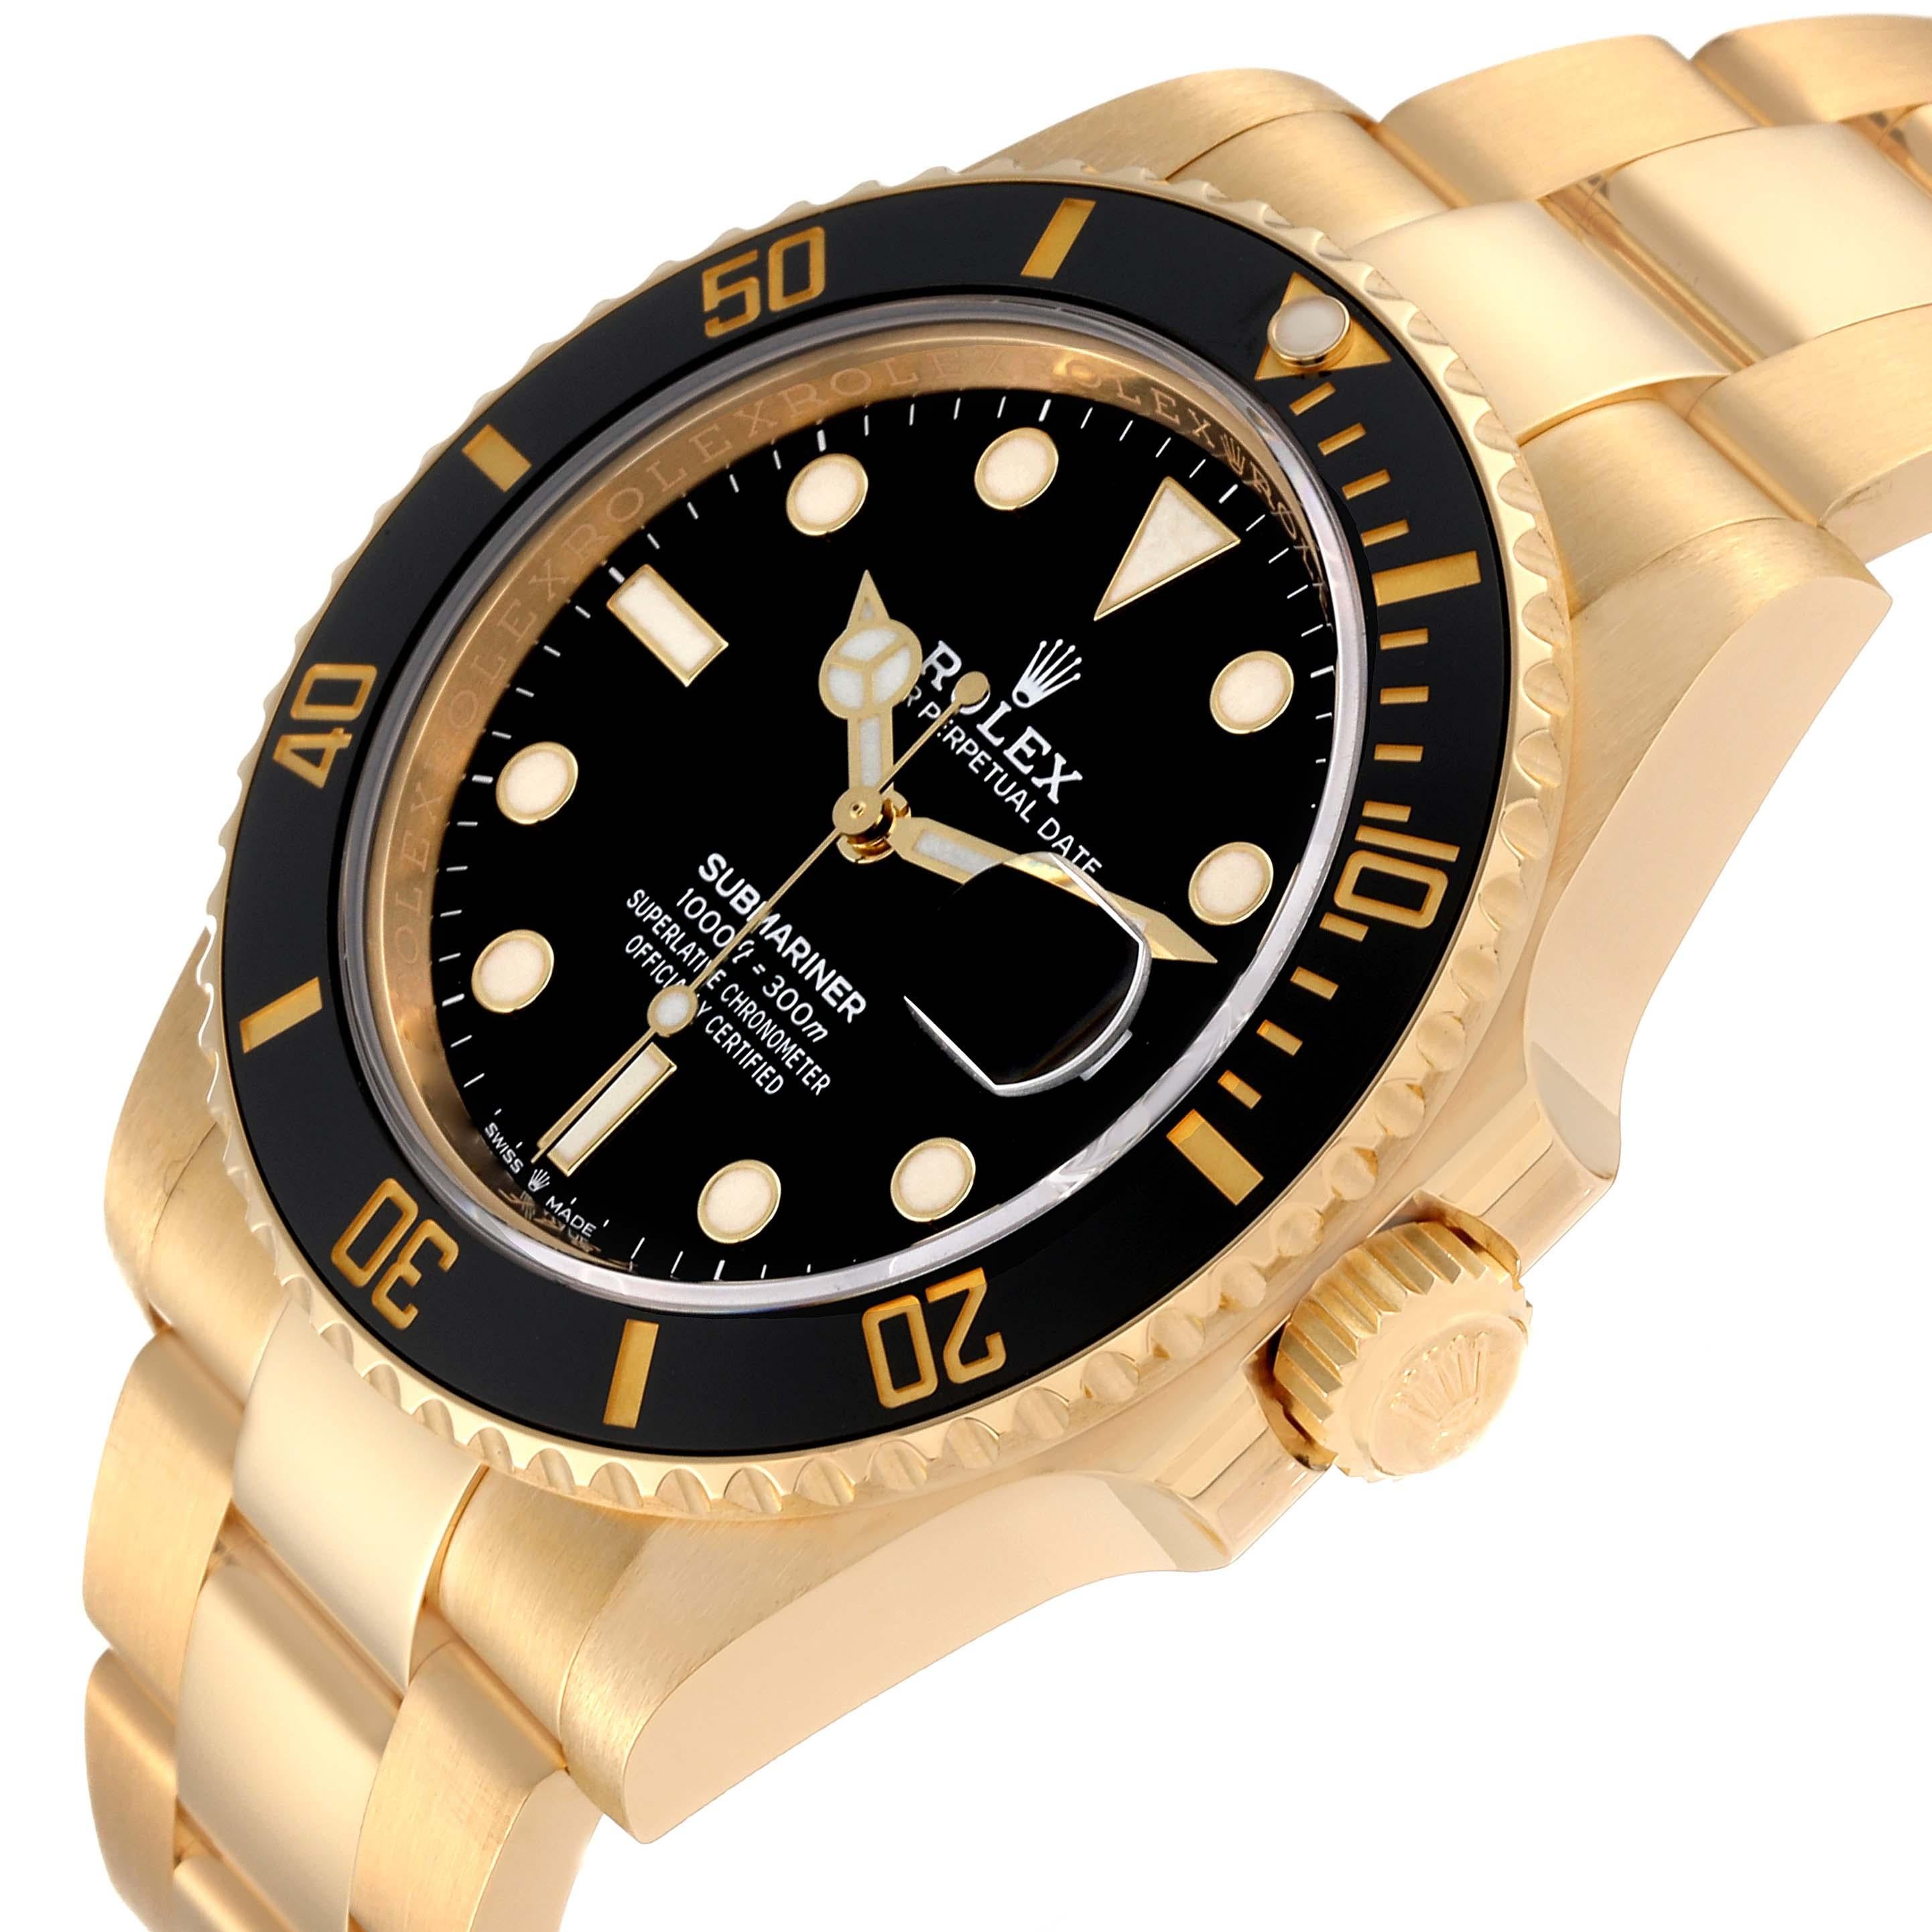 Rolex Submariner Yellow Gold Black Dial Bezel Mens Watch 126618 Box Card For Sale 5